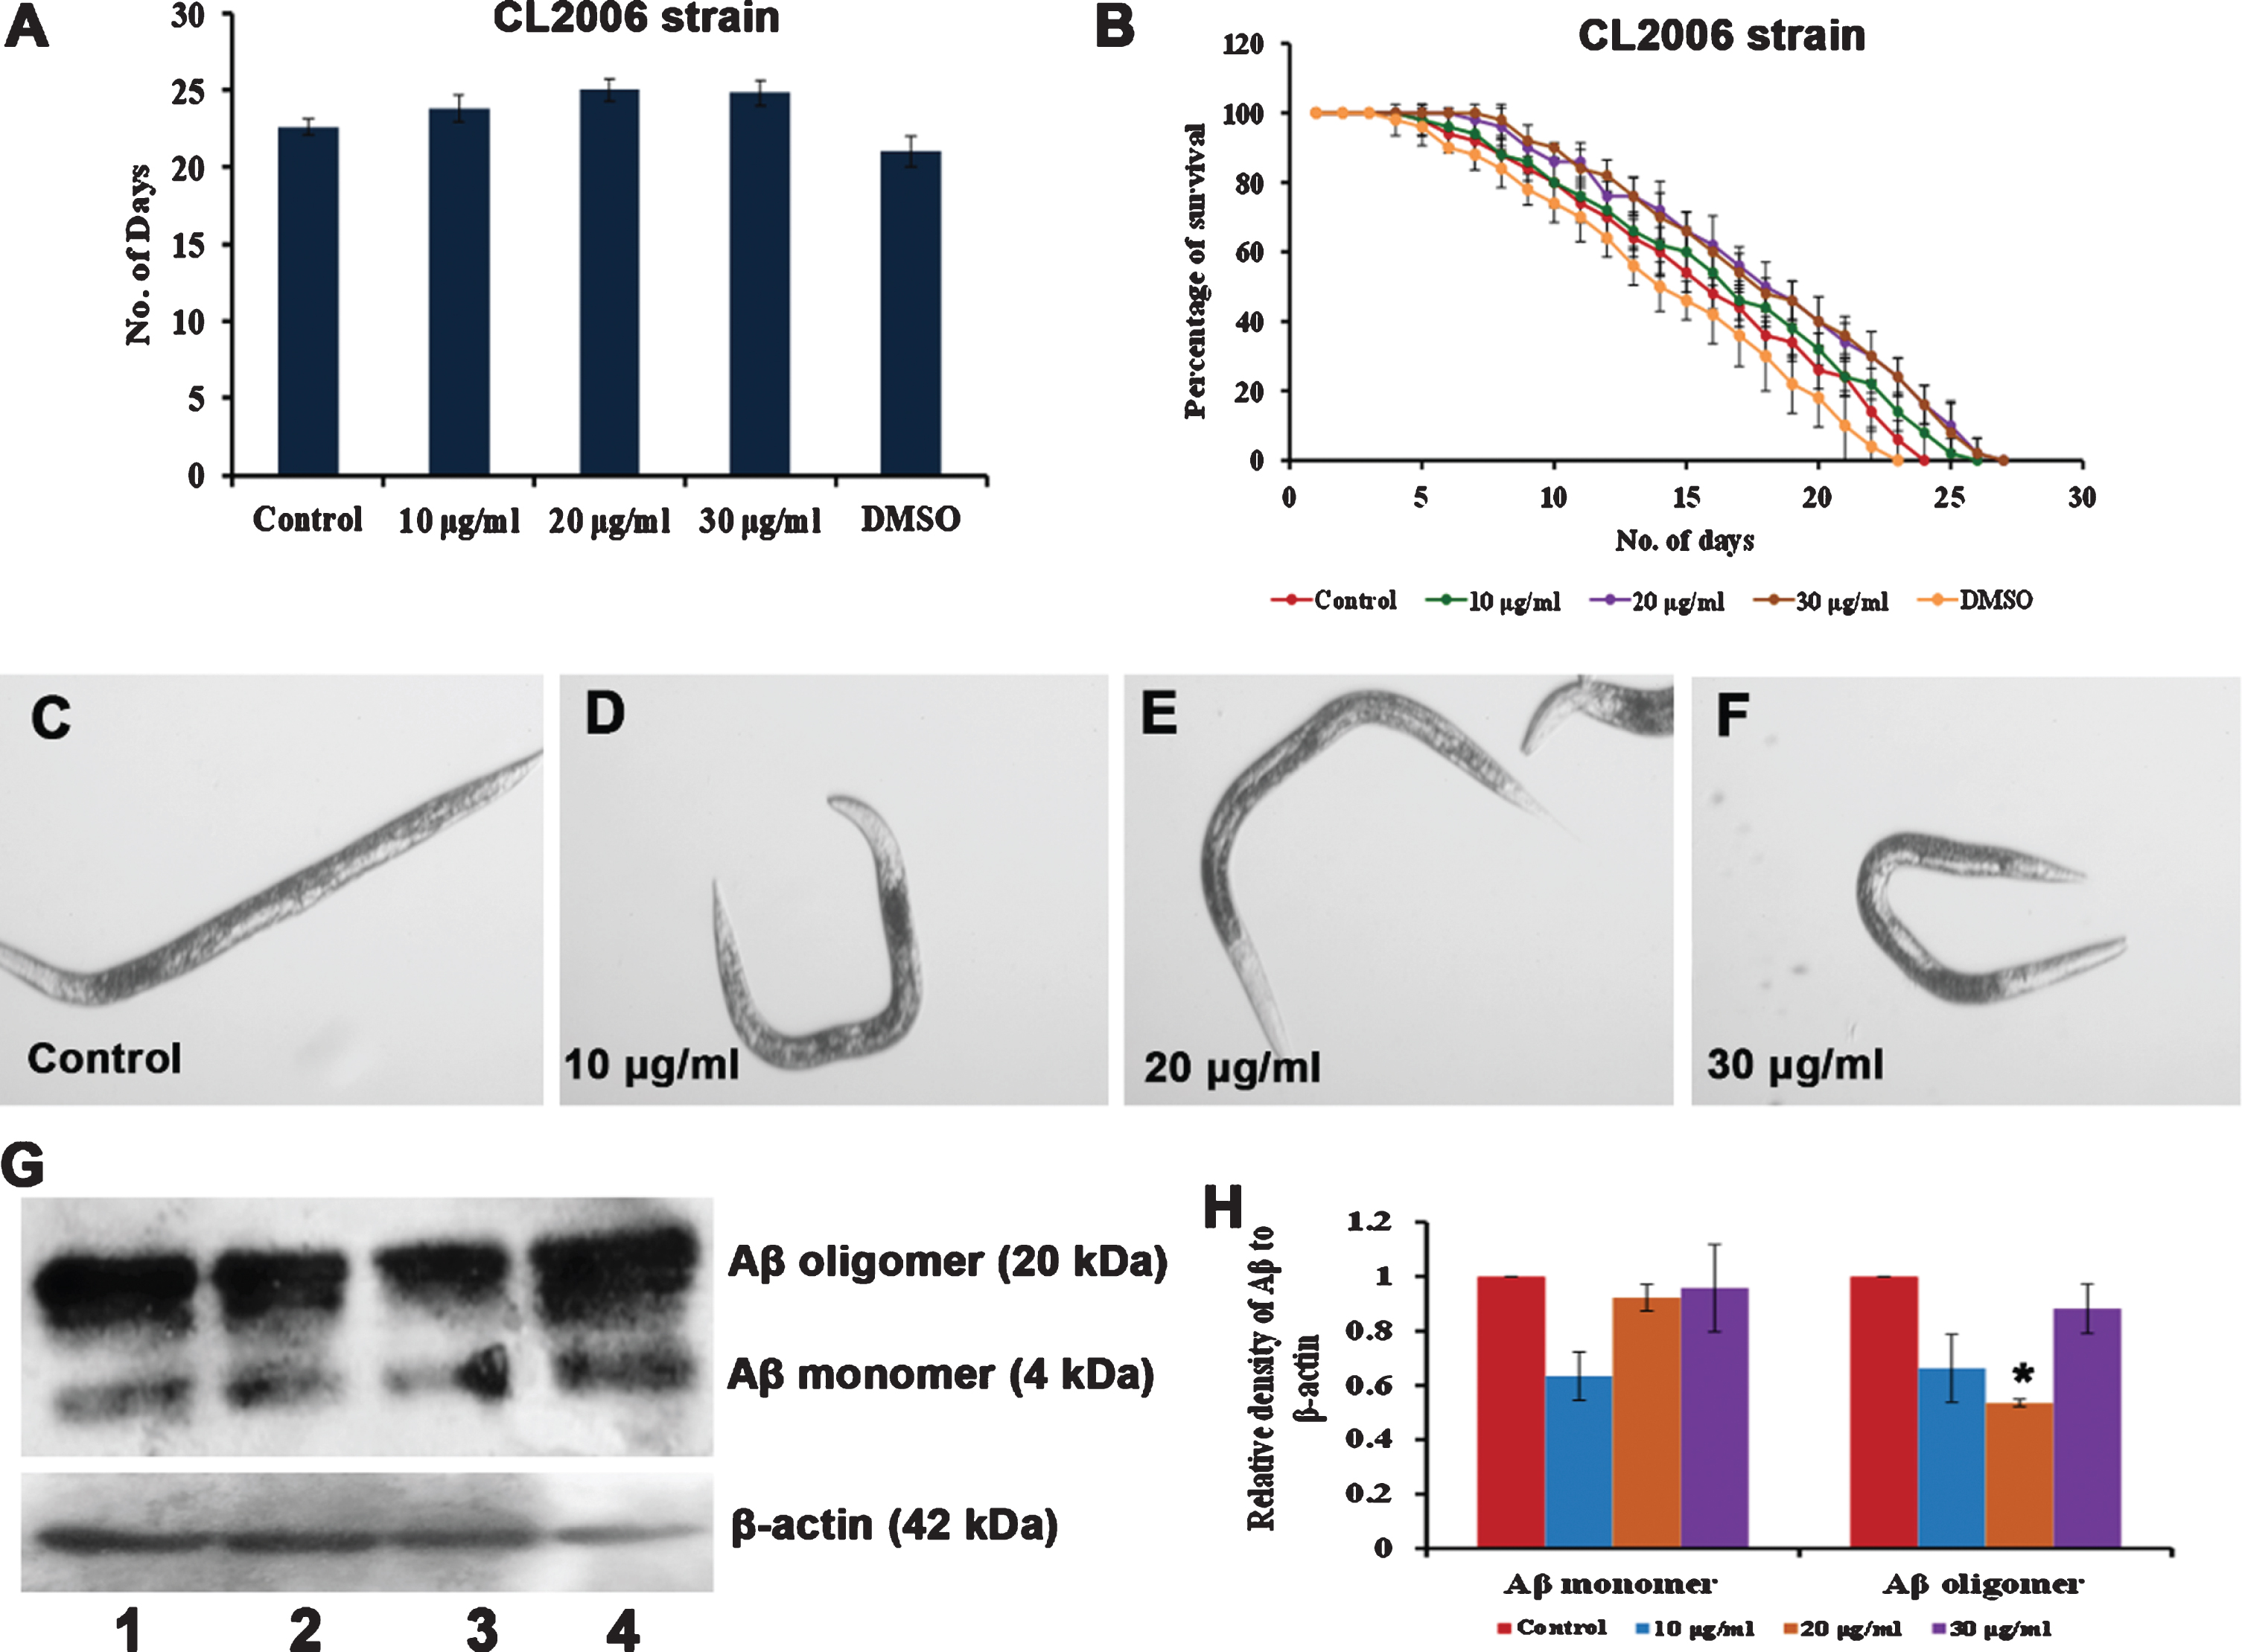 S. asper extract can impart neuroprotection in C. elegans (A) Maximum lifespan of Aβ transgenic strain were significantly (p < 0.05) extended at 20 and 30μg/ml when treated with 10–30μg/ml of S. asper extract (B) Graph representing the average of maximum lifespan extension of Aβ transgenic strain when treated with 10–30μg/ml of S. asper extract (C) Representative image of Aβ transgenic strain which is paralyzed (control) (D-F) Representative image of Aβ transgenic strain treated with 10–30μg/ml of S. asper extract which is not paralyzed (Paralysed worm –straight line; non-paralysed worm –“C” or “S”- shaped) (G) S. asper extract significantly reduced the expression of Aβ oligomer. Lane 1 (control) Lane 2 (10μg/ml S. asper extract) Lane 3 (20μg/ml S. asper extract) Lane 4 (30μg/ml S. asper extract) (H) Quantitative measurement of the relative density of Aβ to β-actin expression (*P < 0.05 compared between control and S. asper treated group).